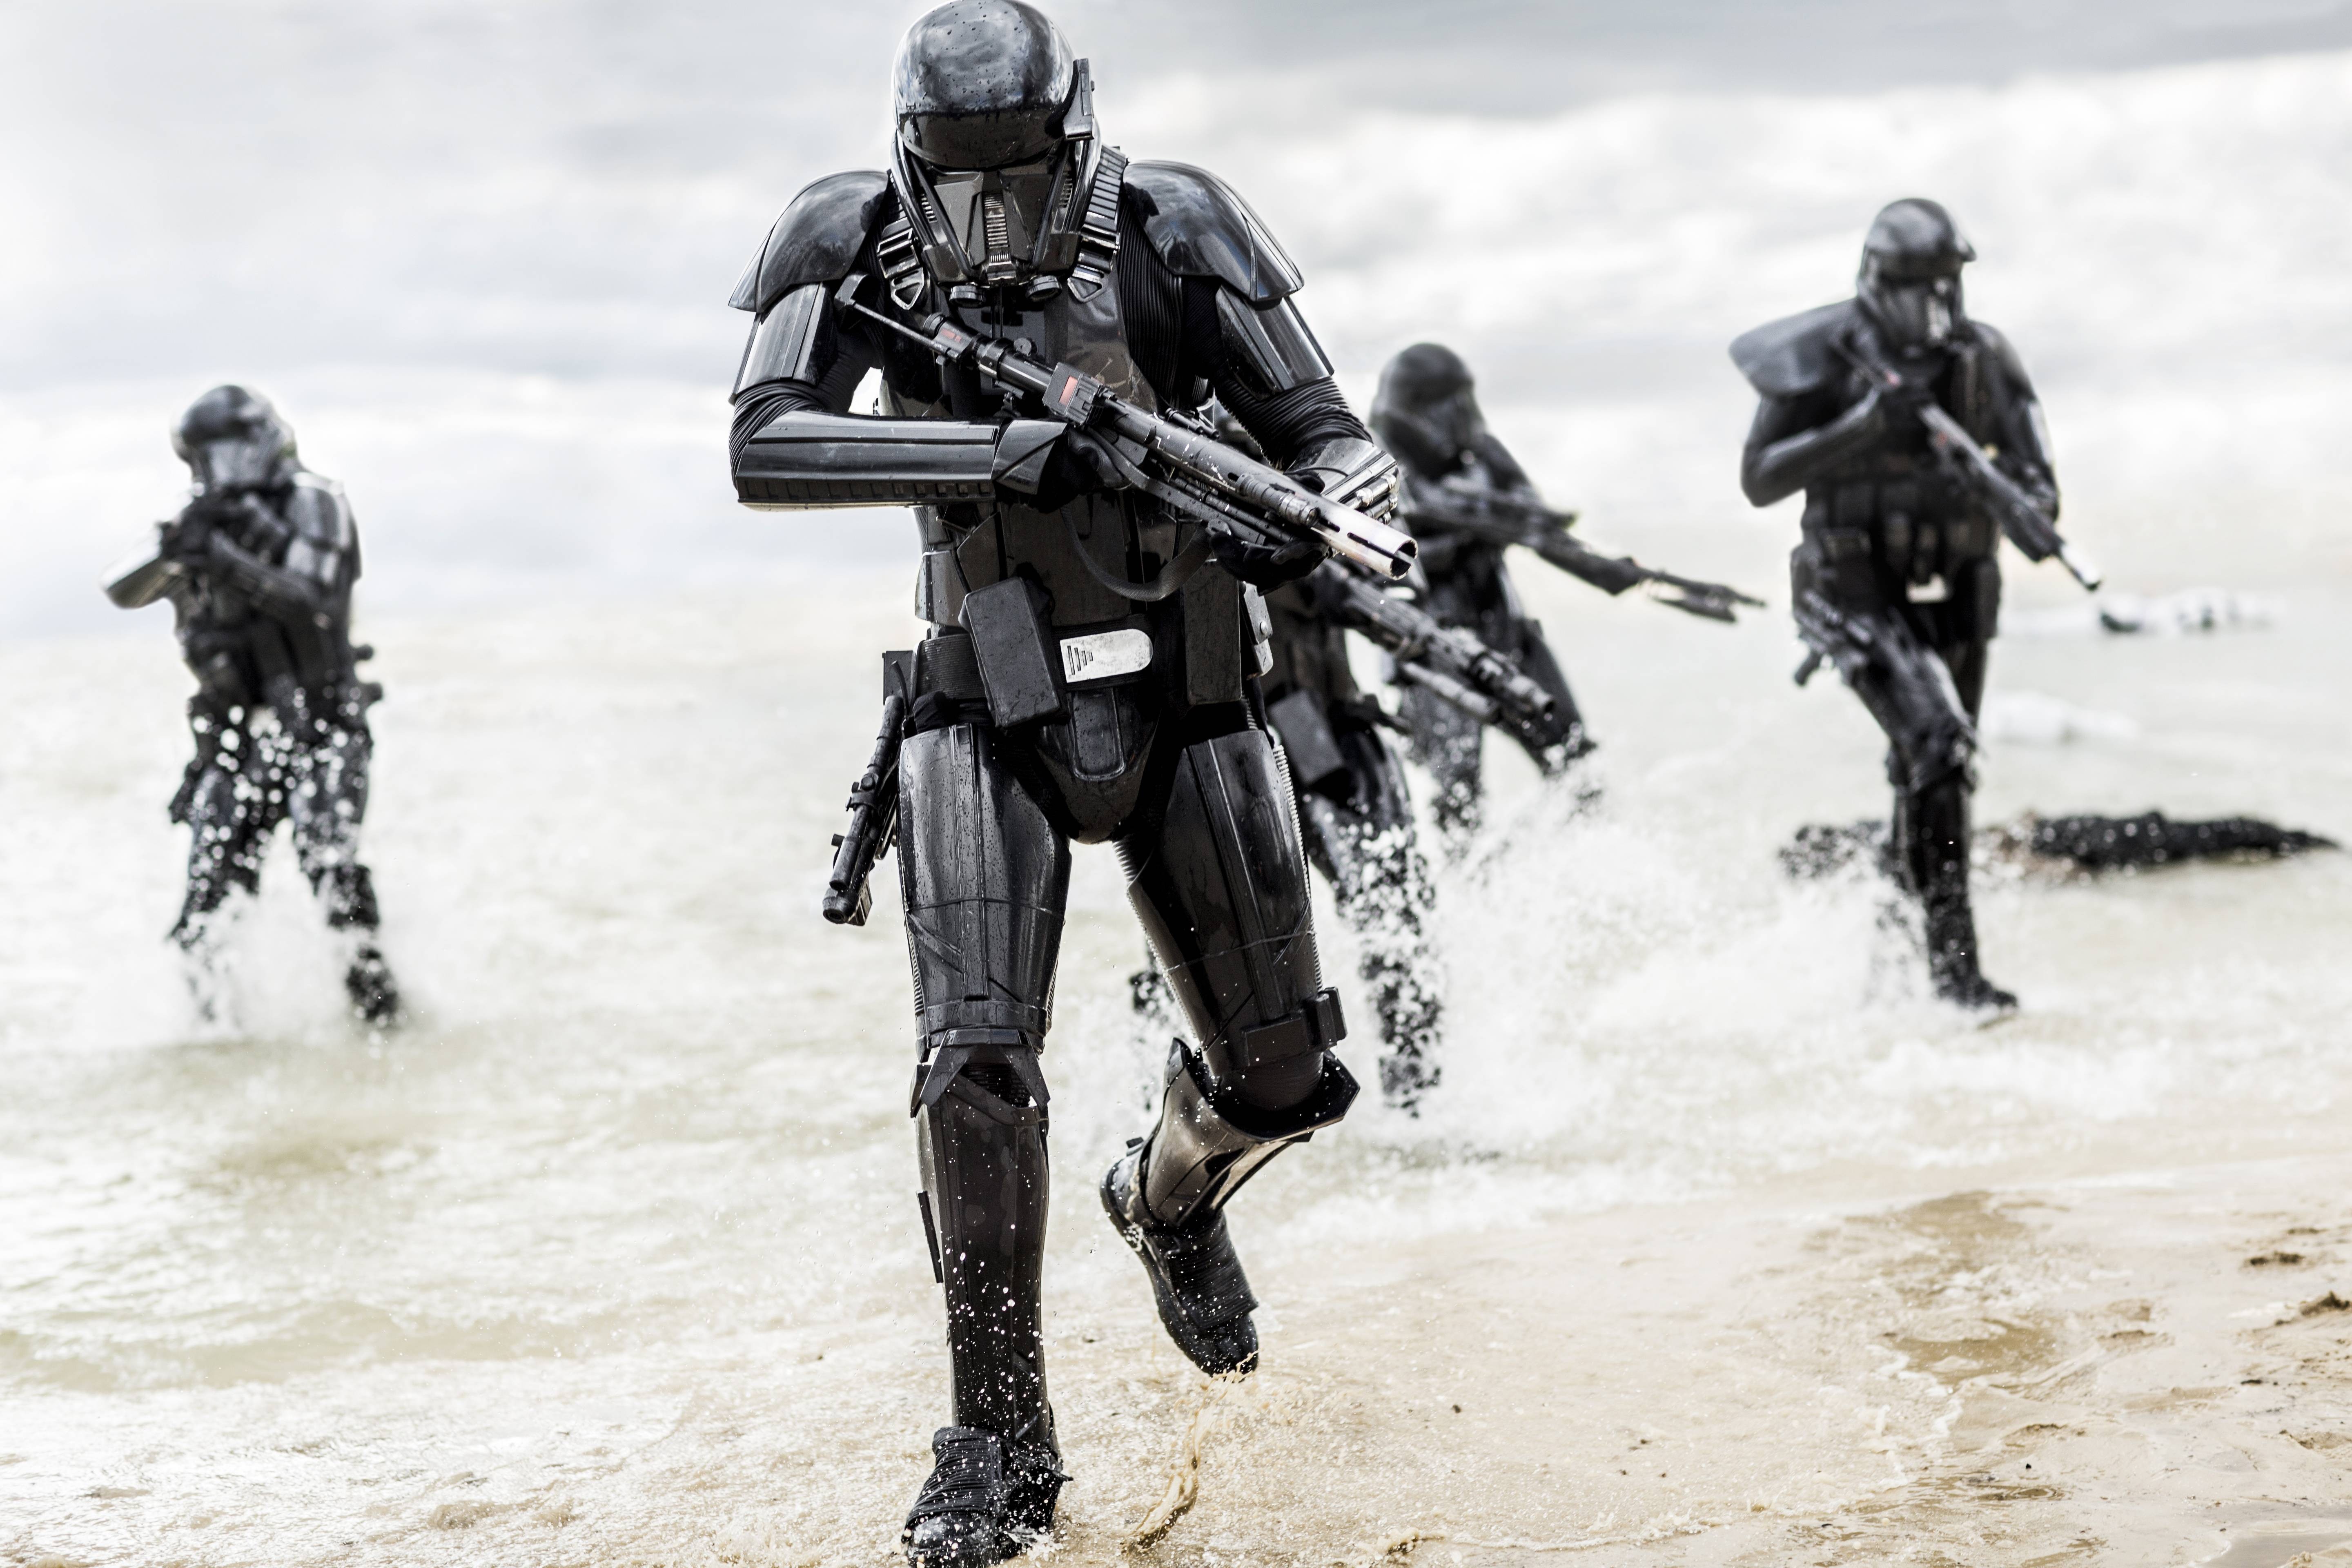 Star Wars Rogue One A Star Wars Story Stormtrooper Death Troopers Imperial Forces Soldier Military 5760x3840